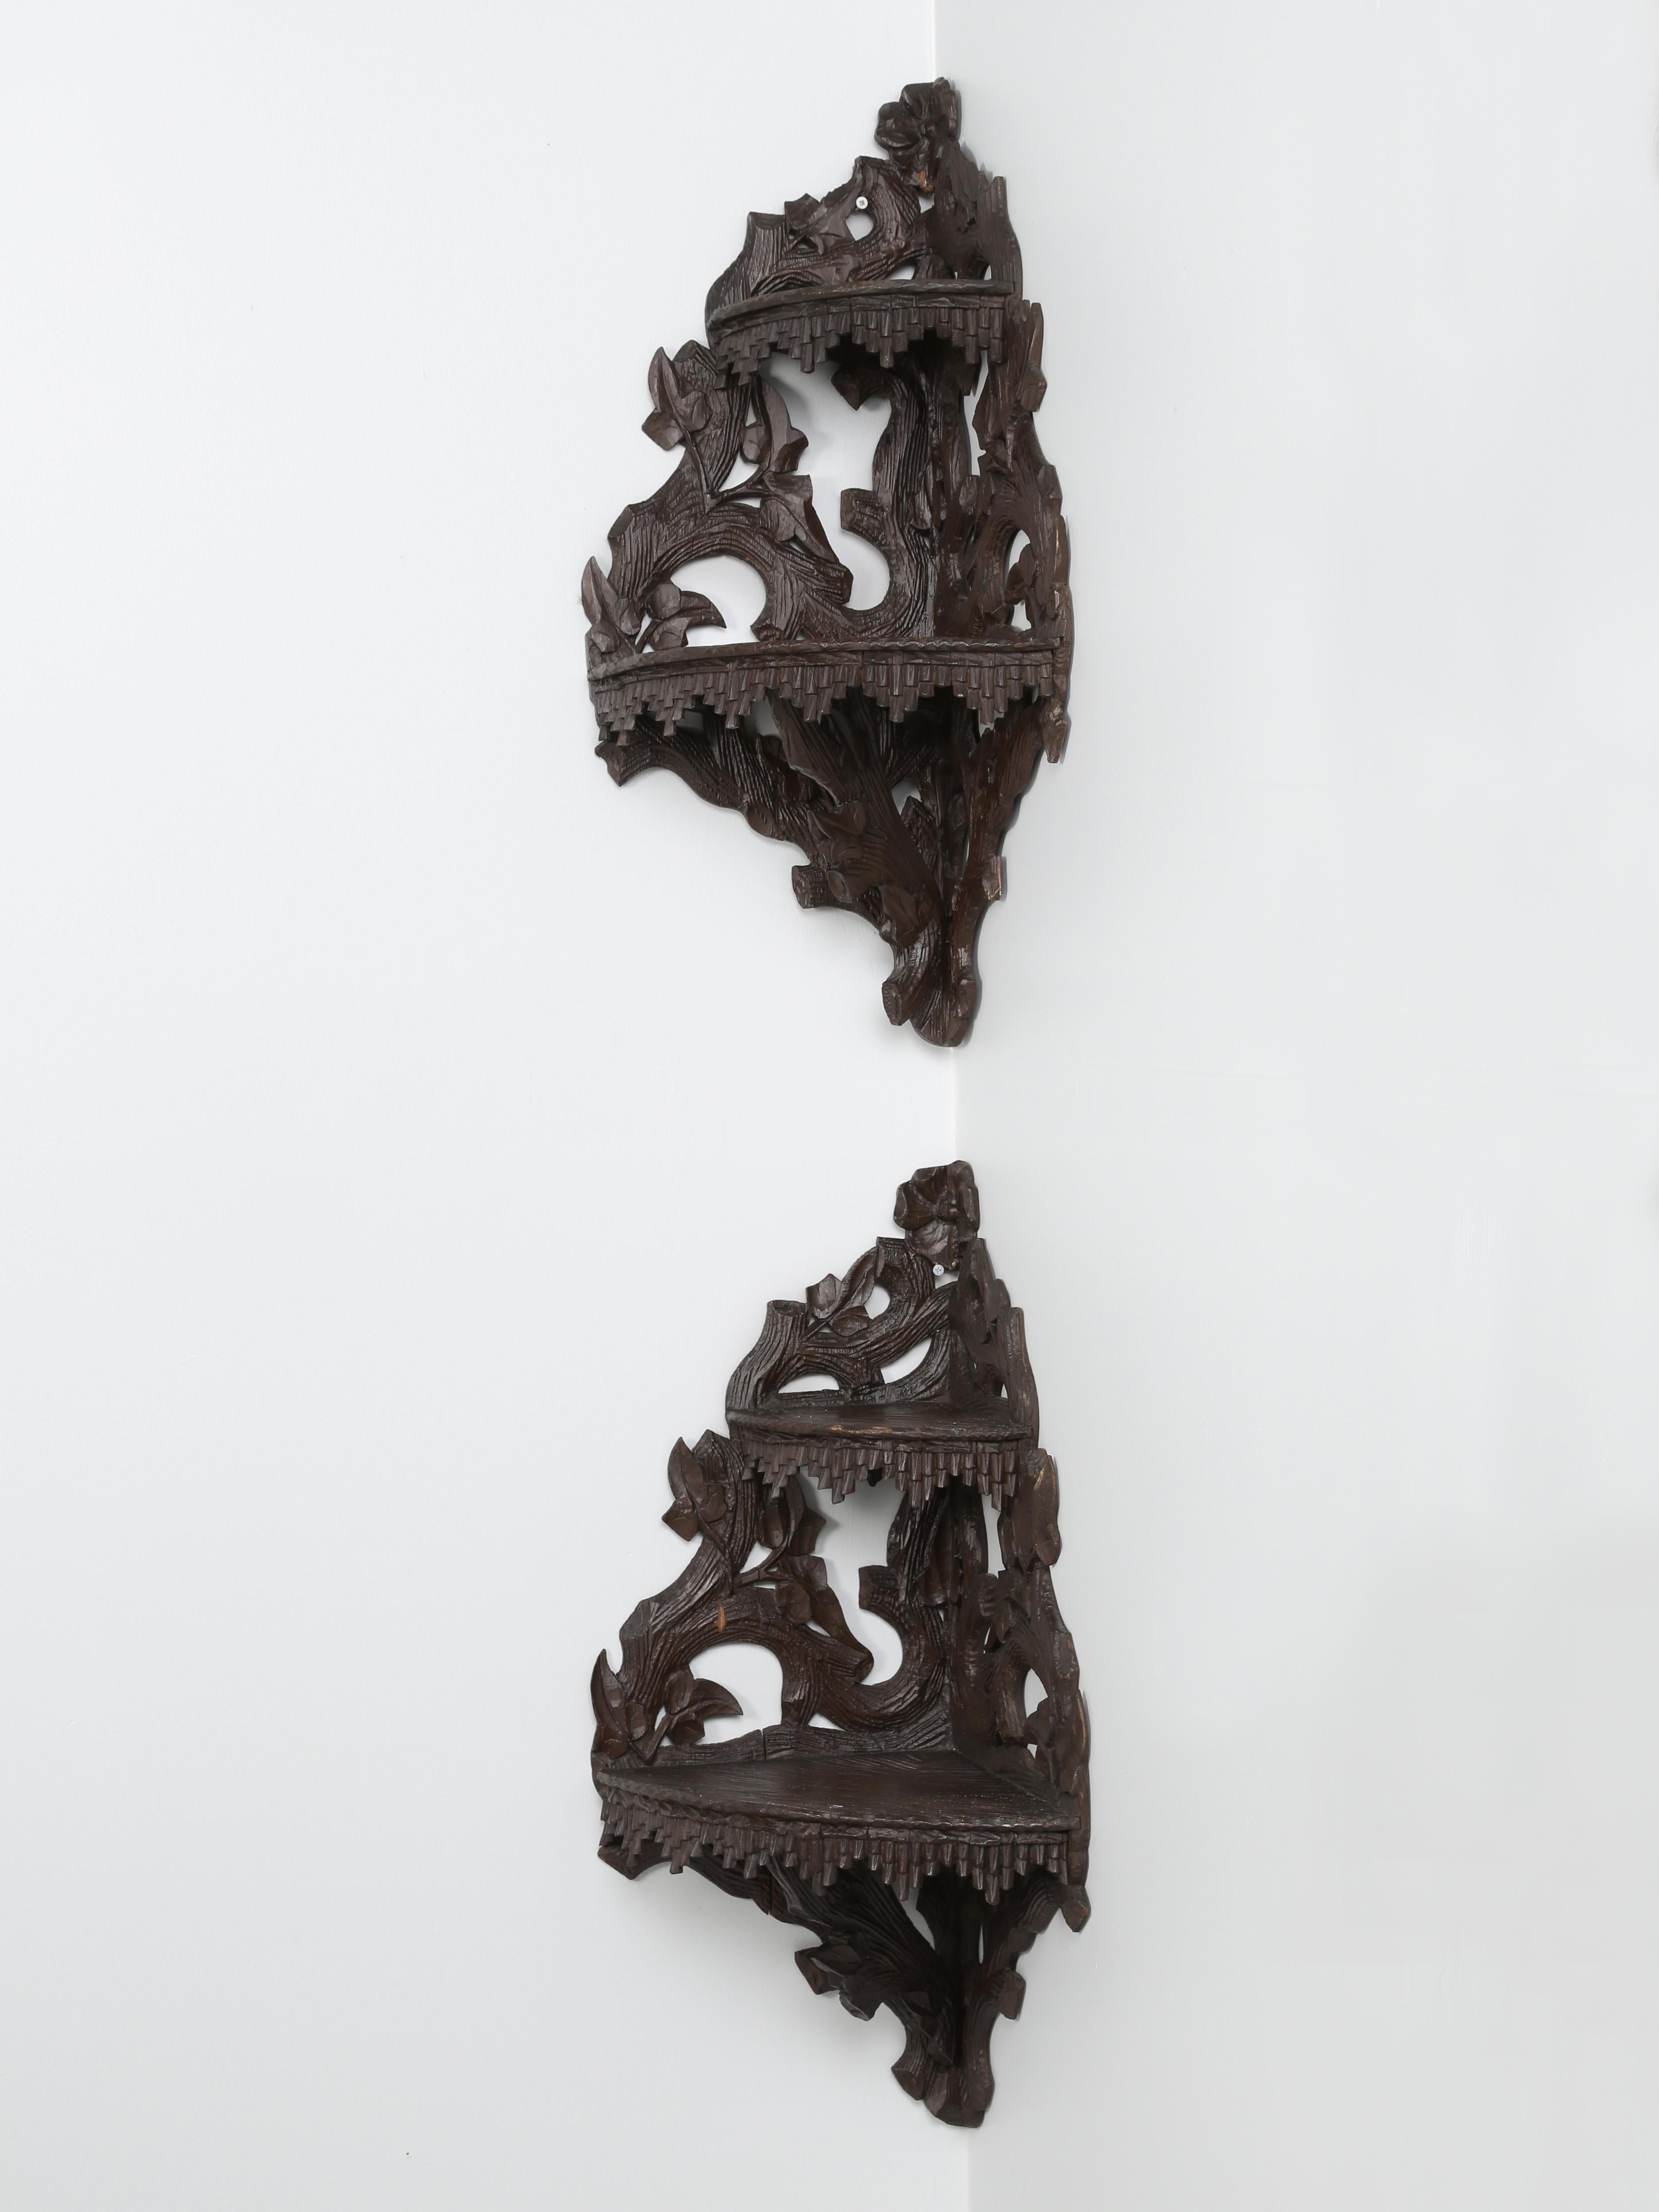 Black forest pair of hanging corner shelves, hand carved in Switzerland between 1860 and 1890. The black forest hanging corner shelves are quite unusual with their original intricate carving. Black Forest Furniture began to appear in the mid-1800s